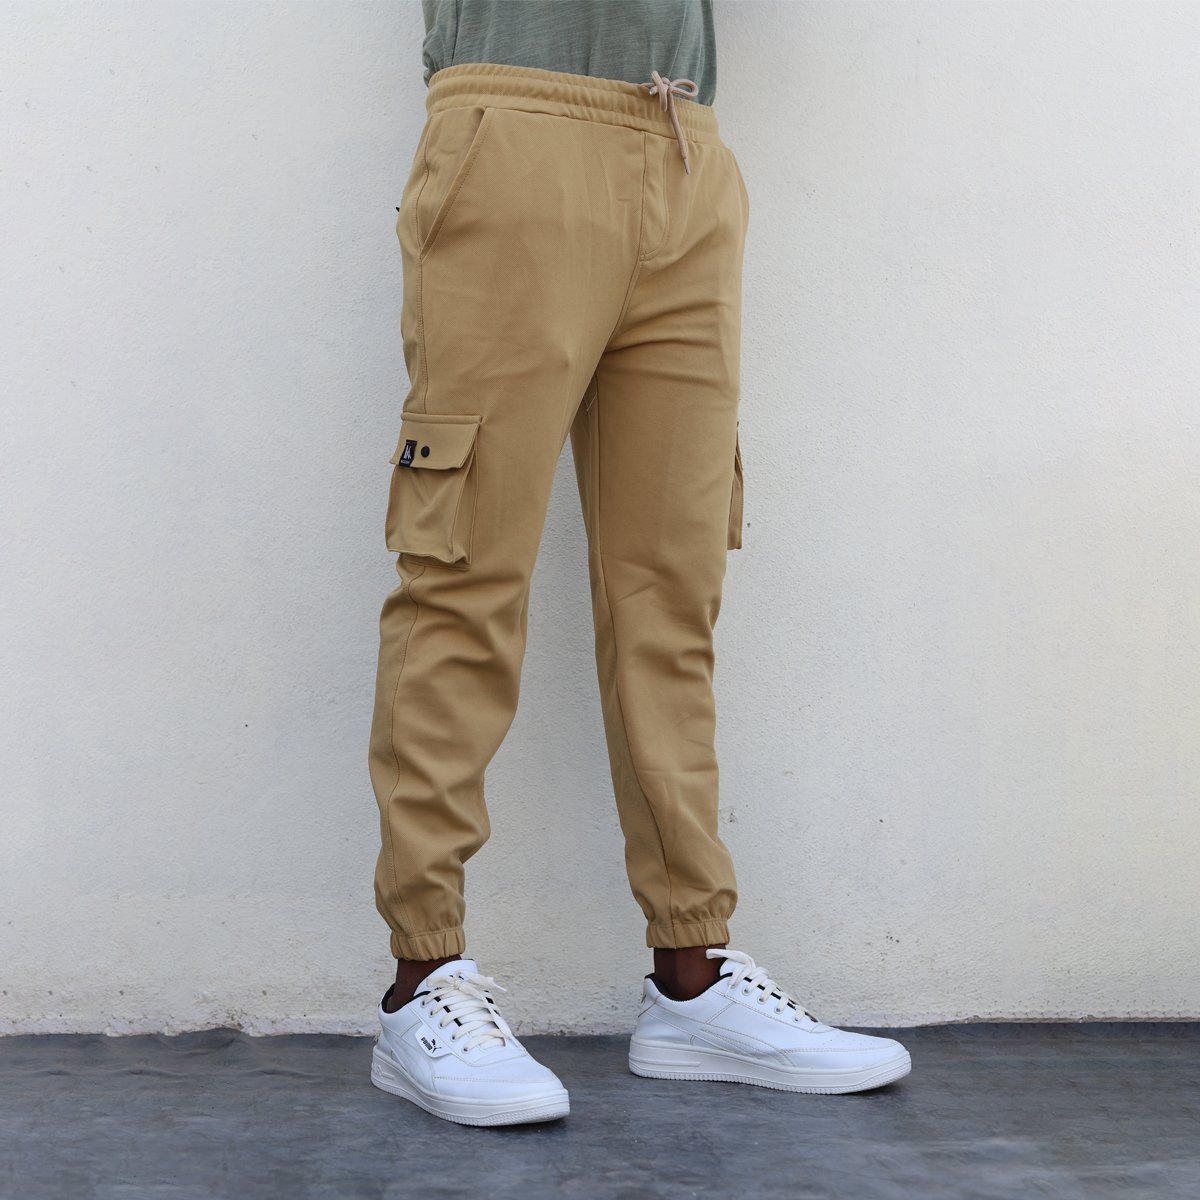 fcity.in - Gazzet Men Cargos Four Way Stretchable Imported Lycra Are Just  The